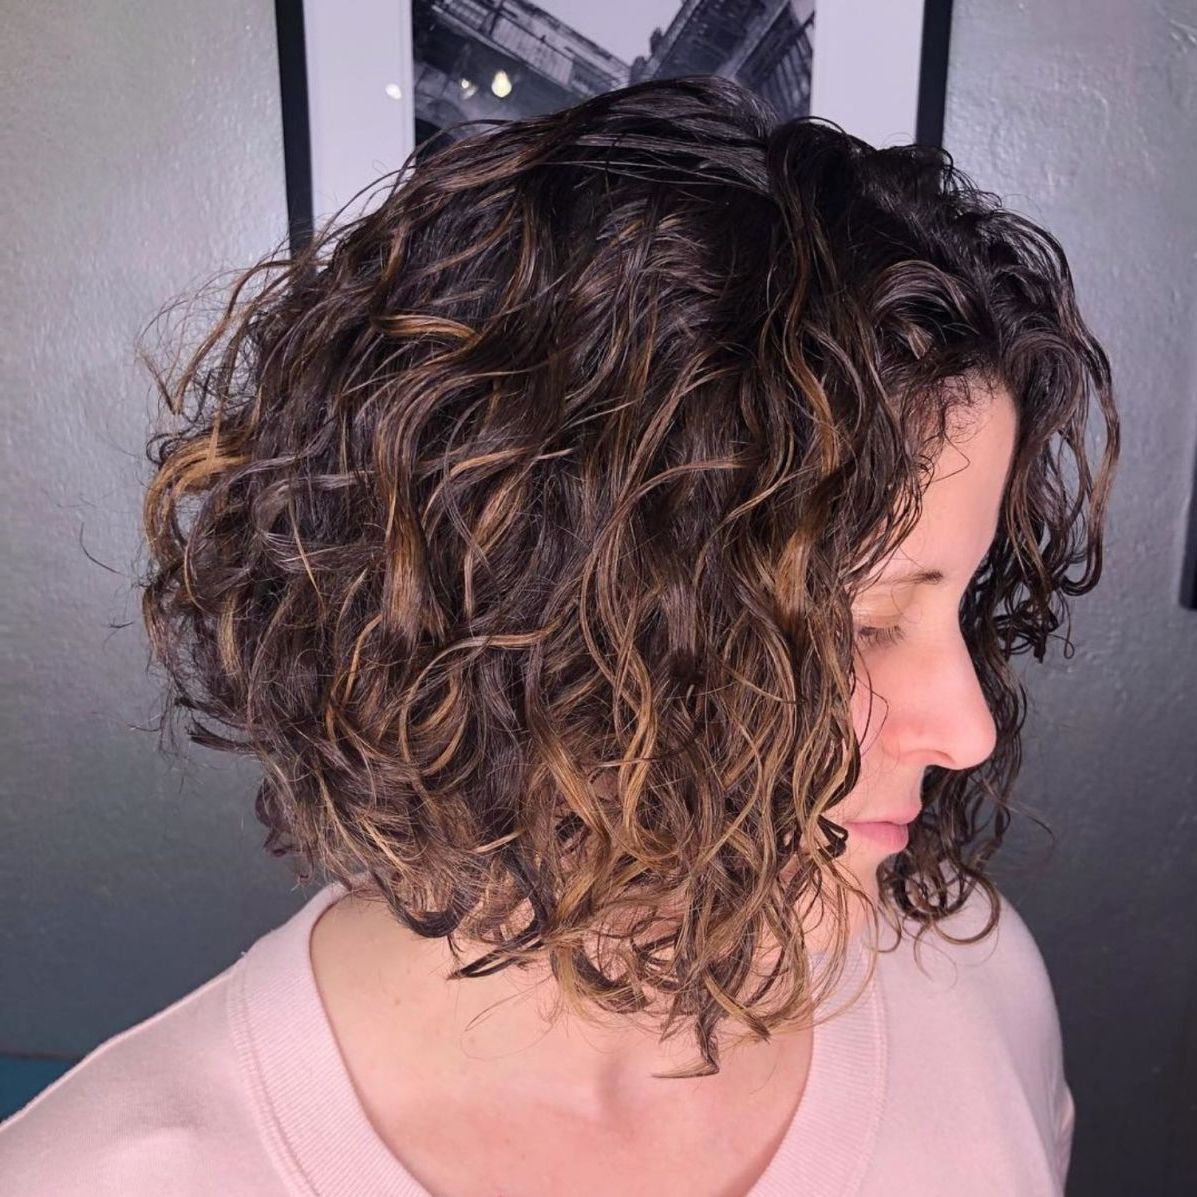 55 Different Versions Of Curly Bob Hairstyle | Me | Pinterest Throughout Short Curly Caramel Brown Bob Hairstyles (View 14 of 25)